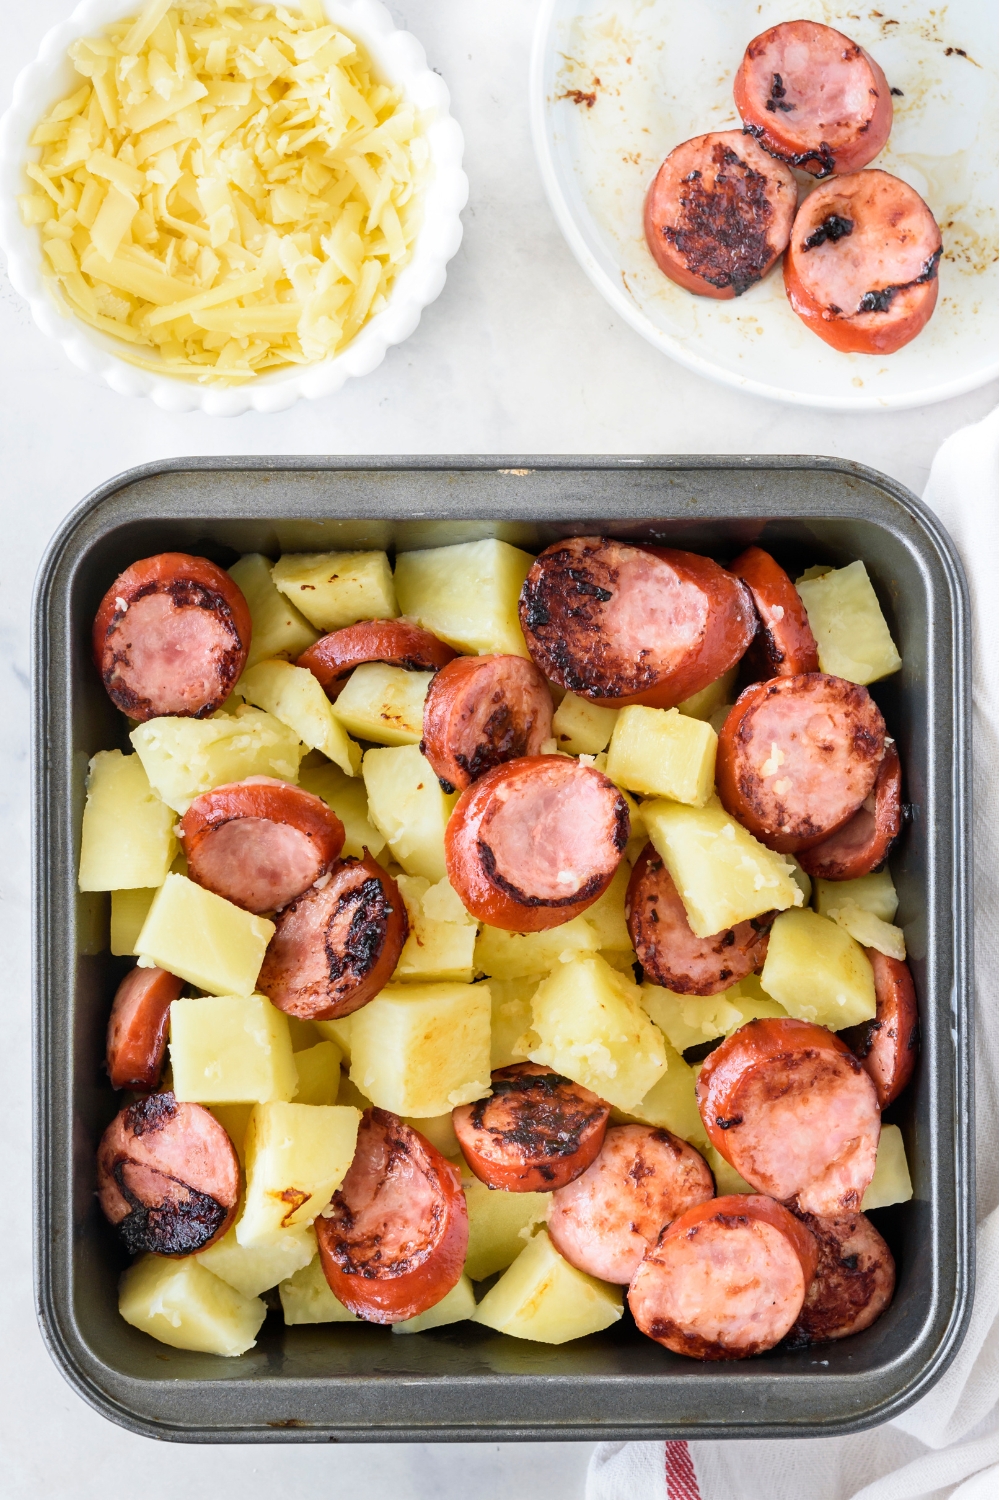 A baking dish filled with browned sausages and boiled potatoes.